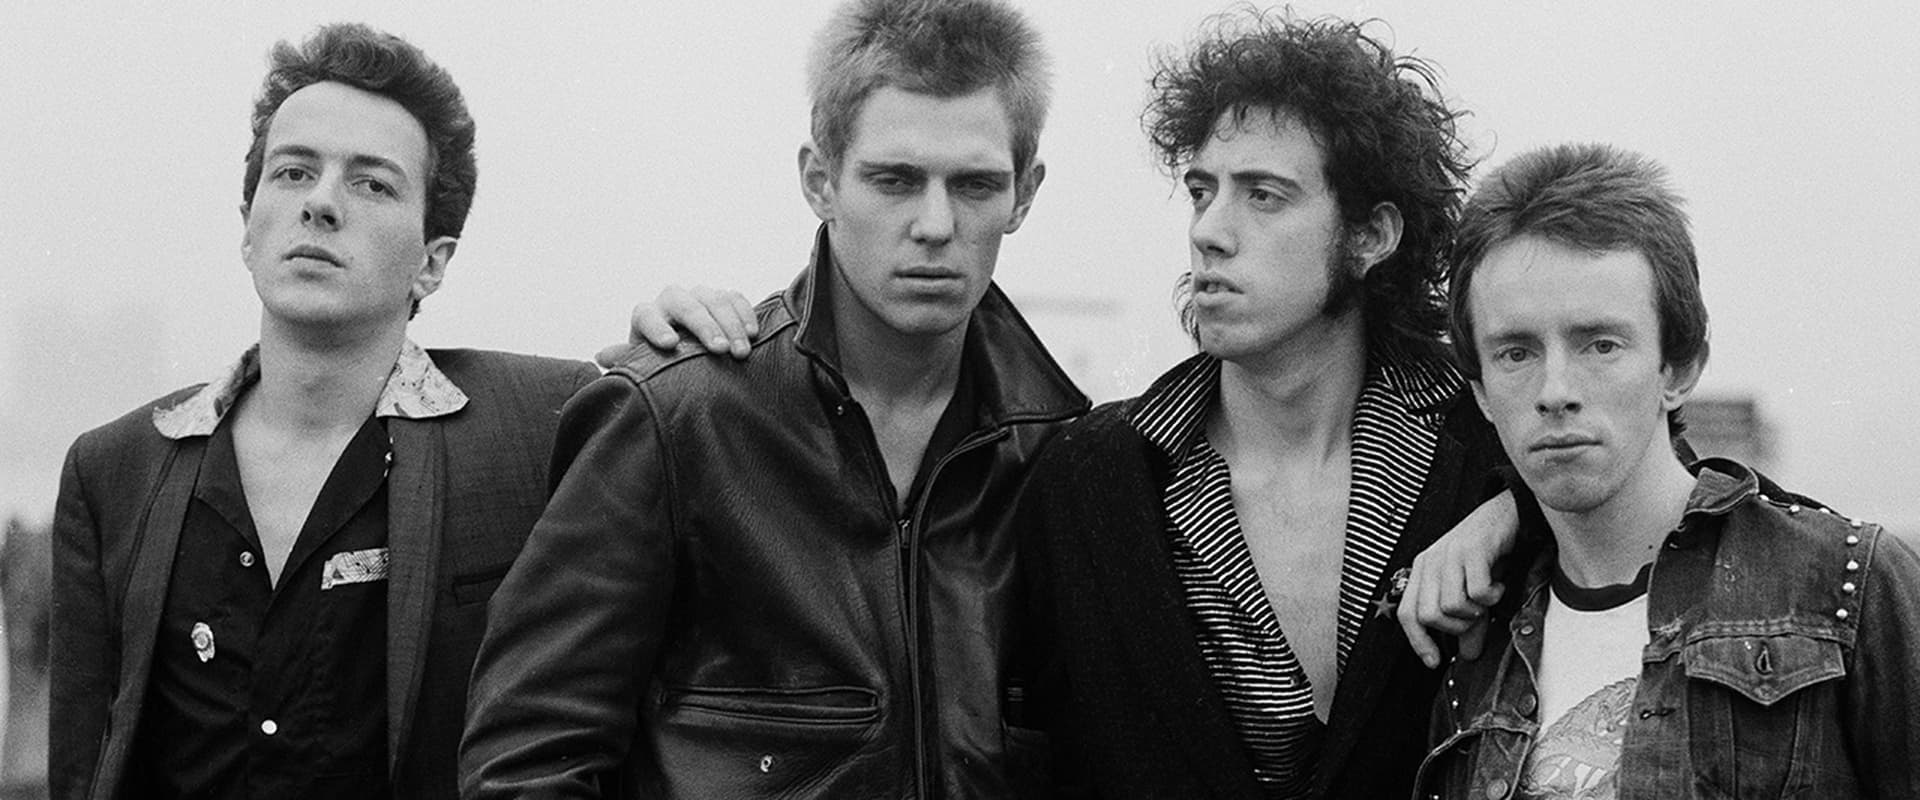 The Clash - Westway To The World